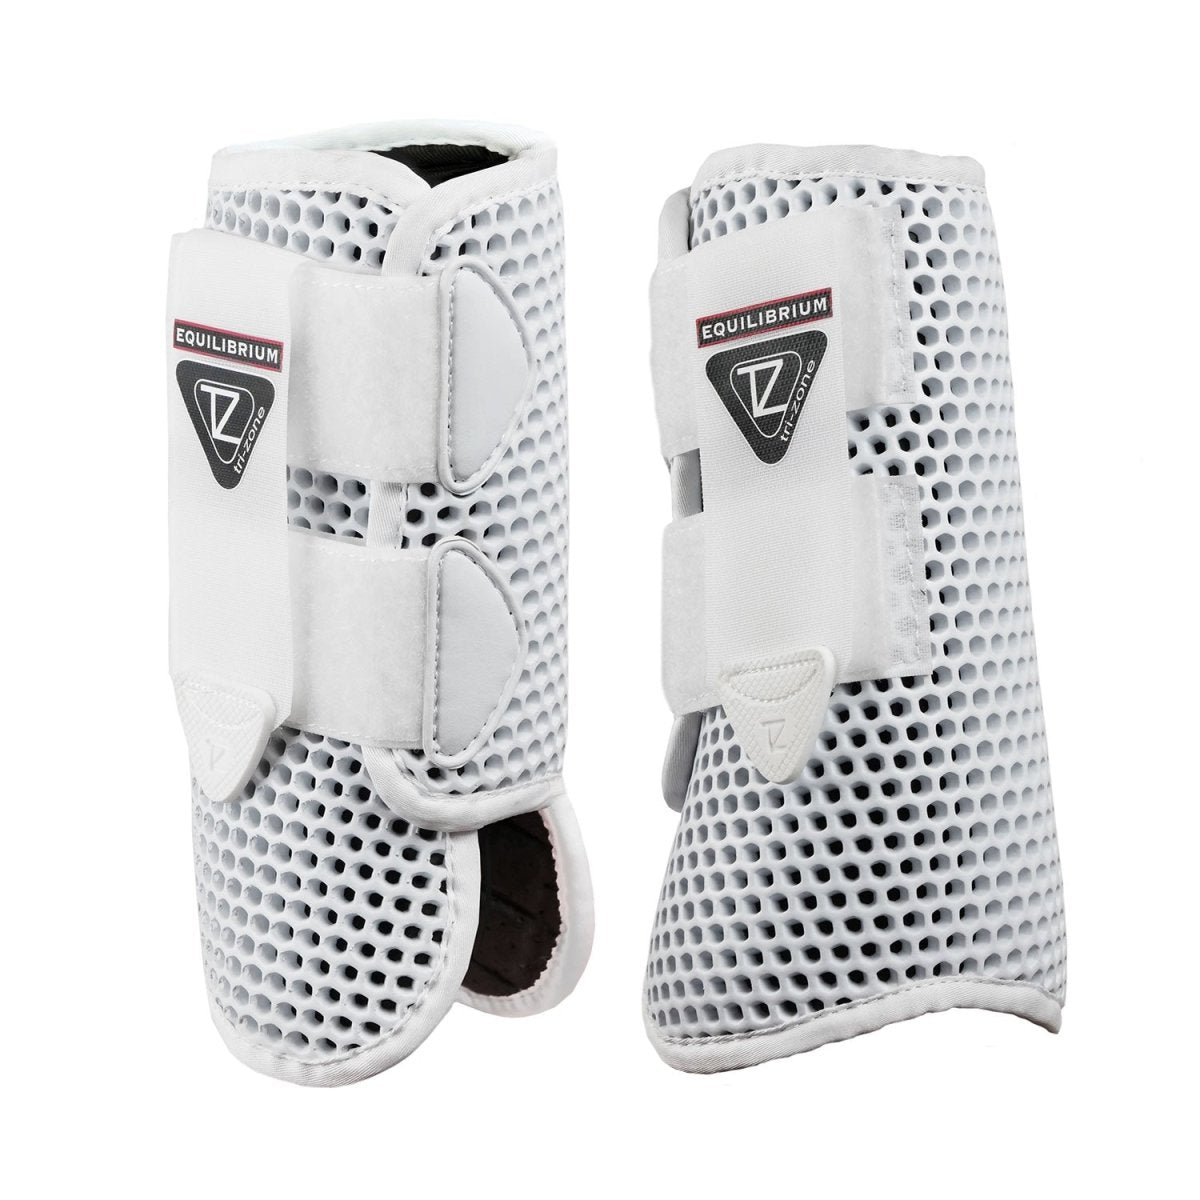 Equilibrium Tri-Zone All Sports Boots - White - Small